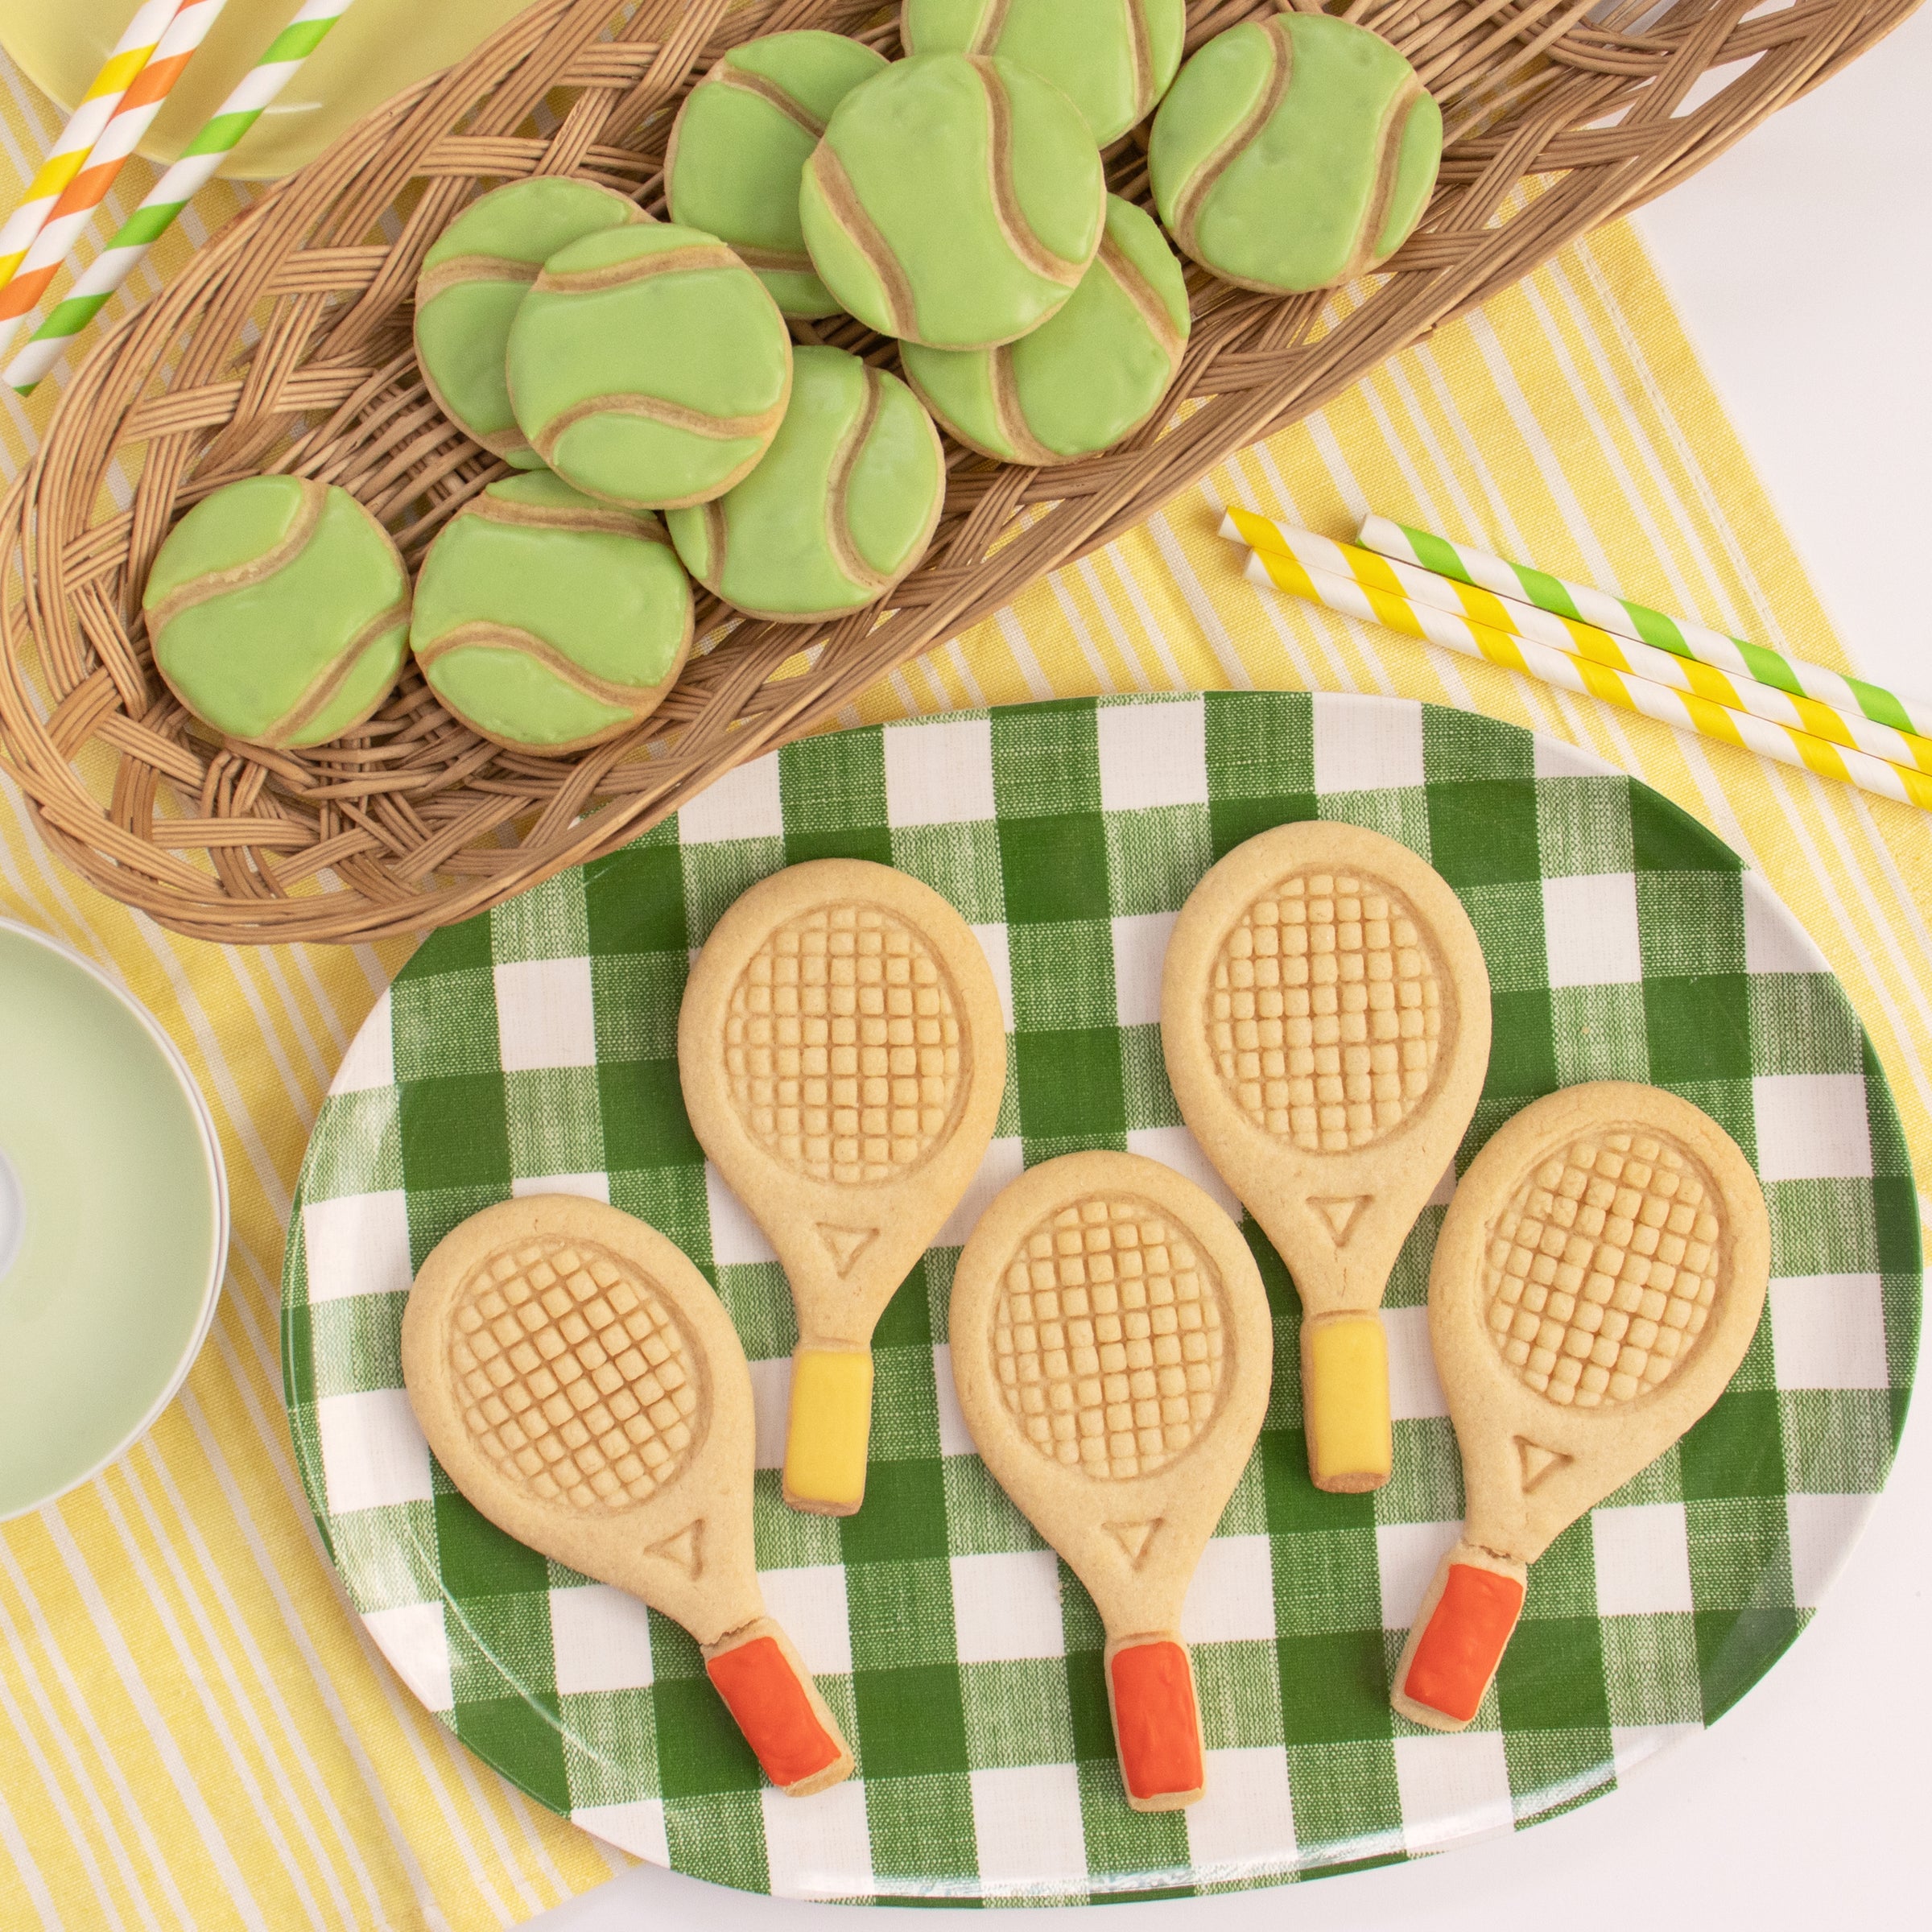 tennis racket and ball cookies